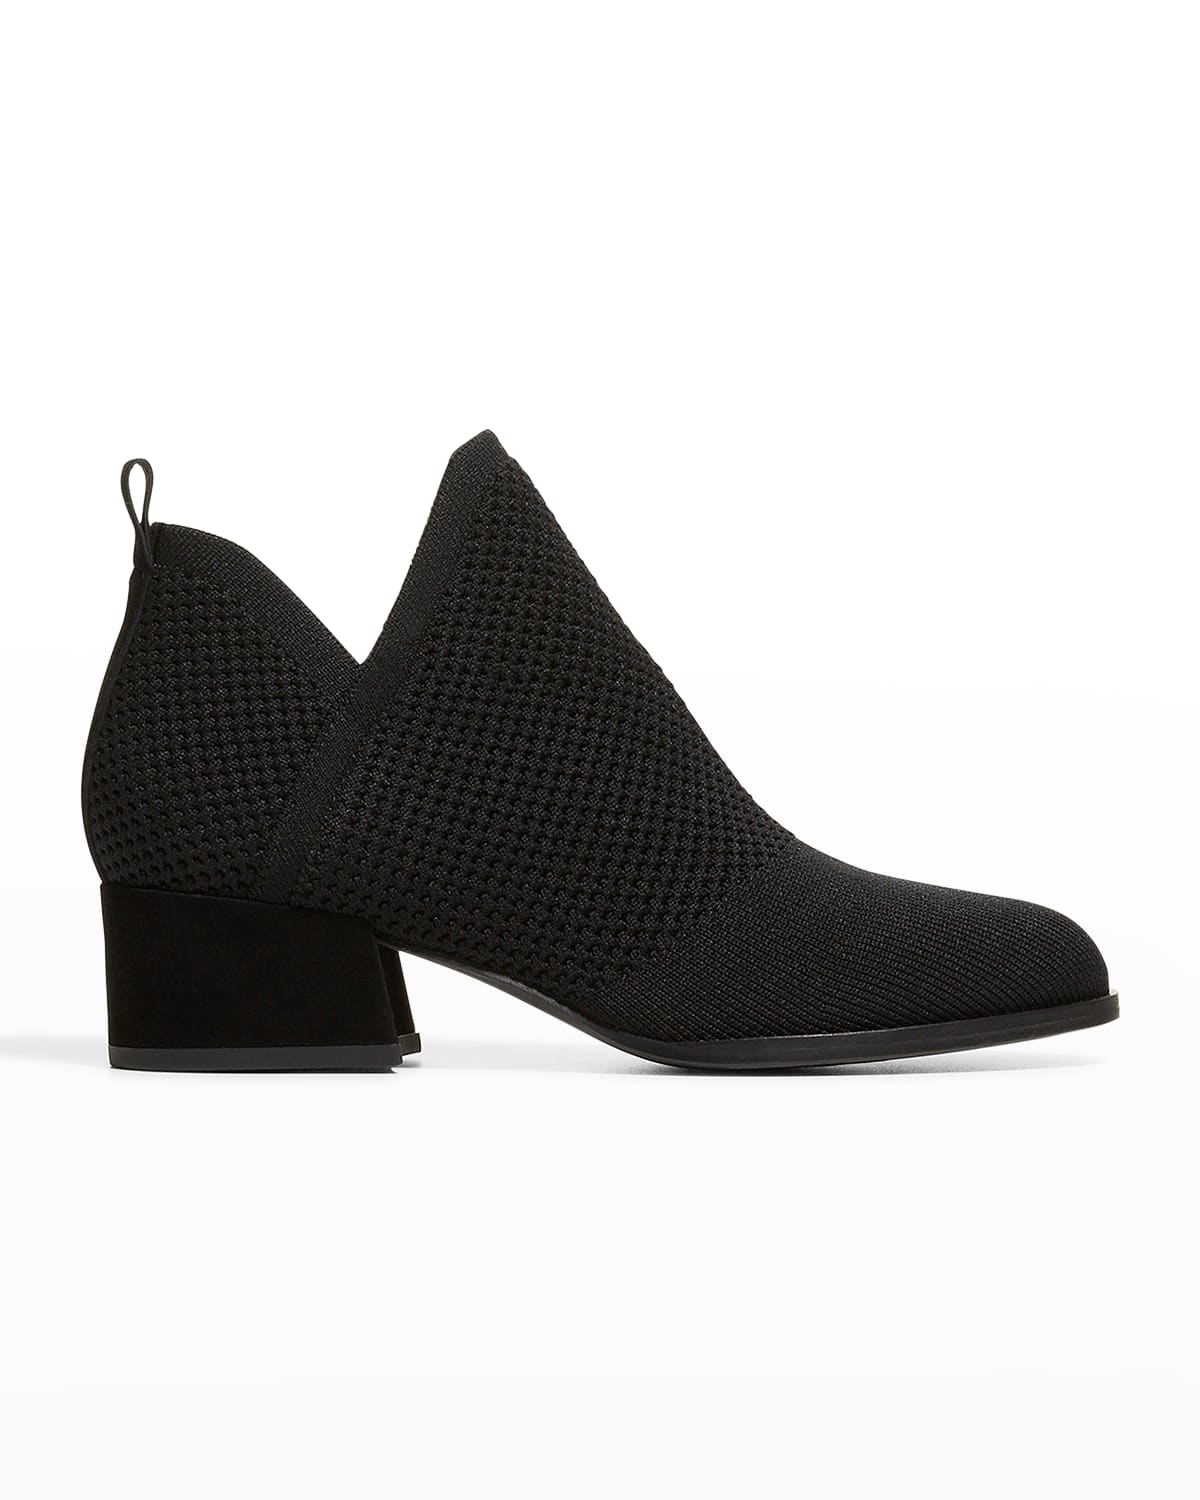 Clever Knit Slip-On Ankle Booties